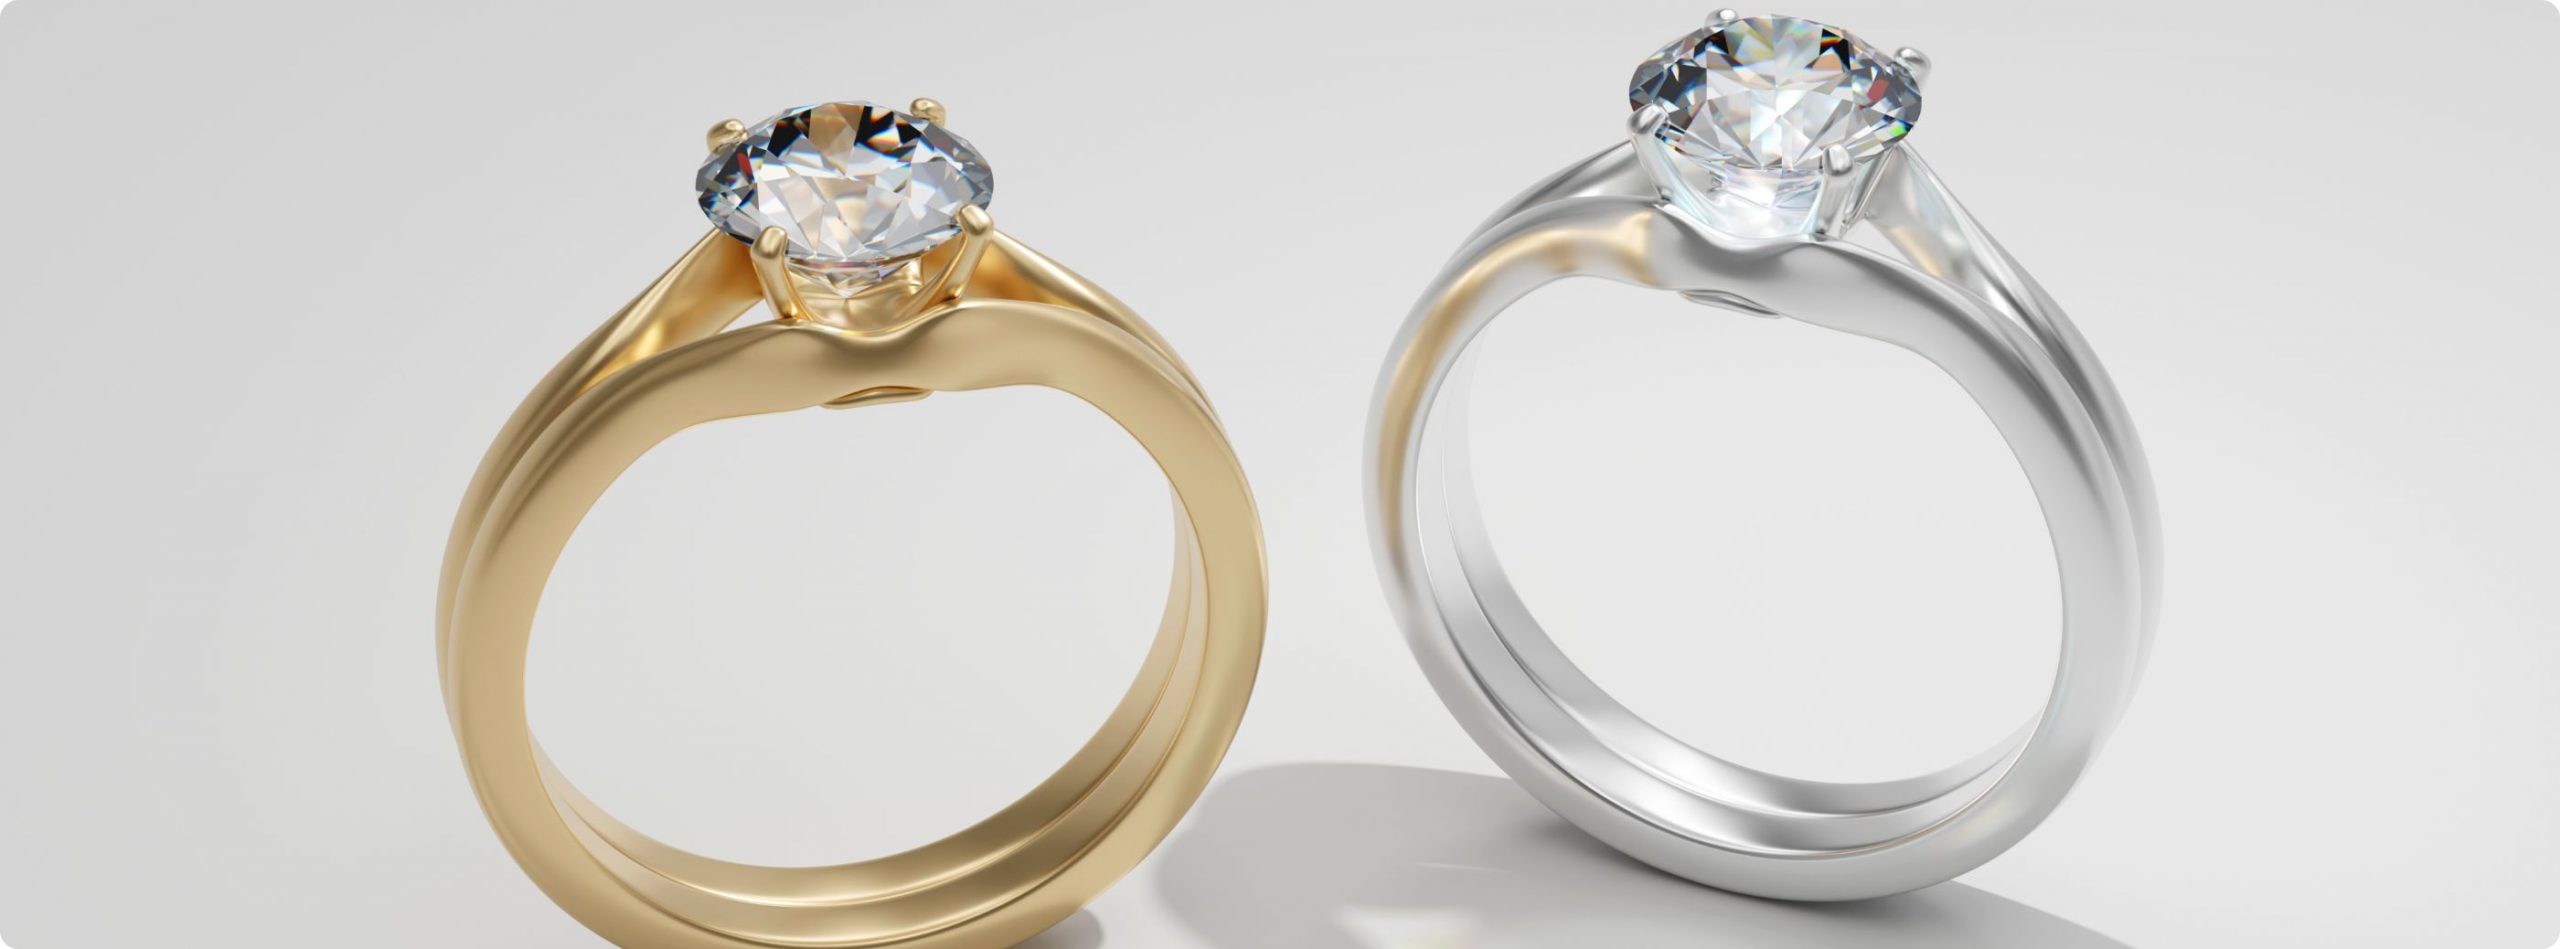 How to Determine The Resale Value of an Engagement Ring